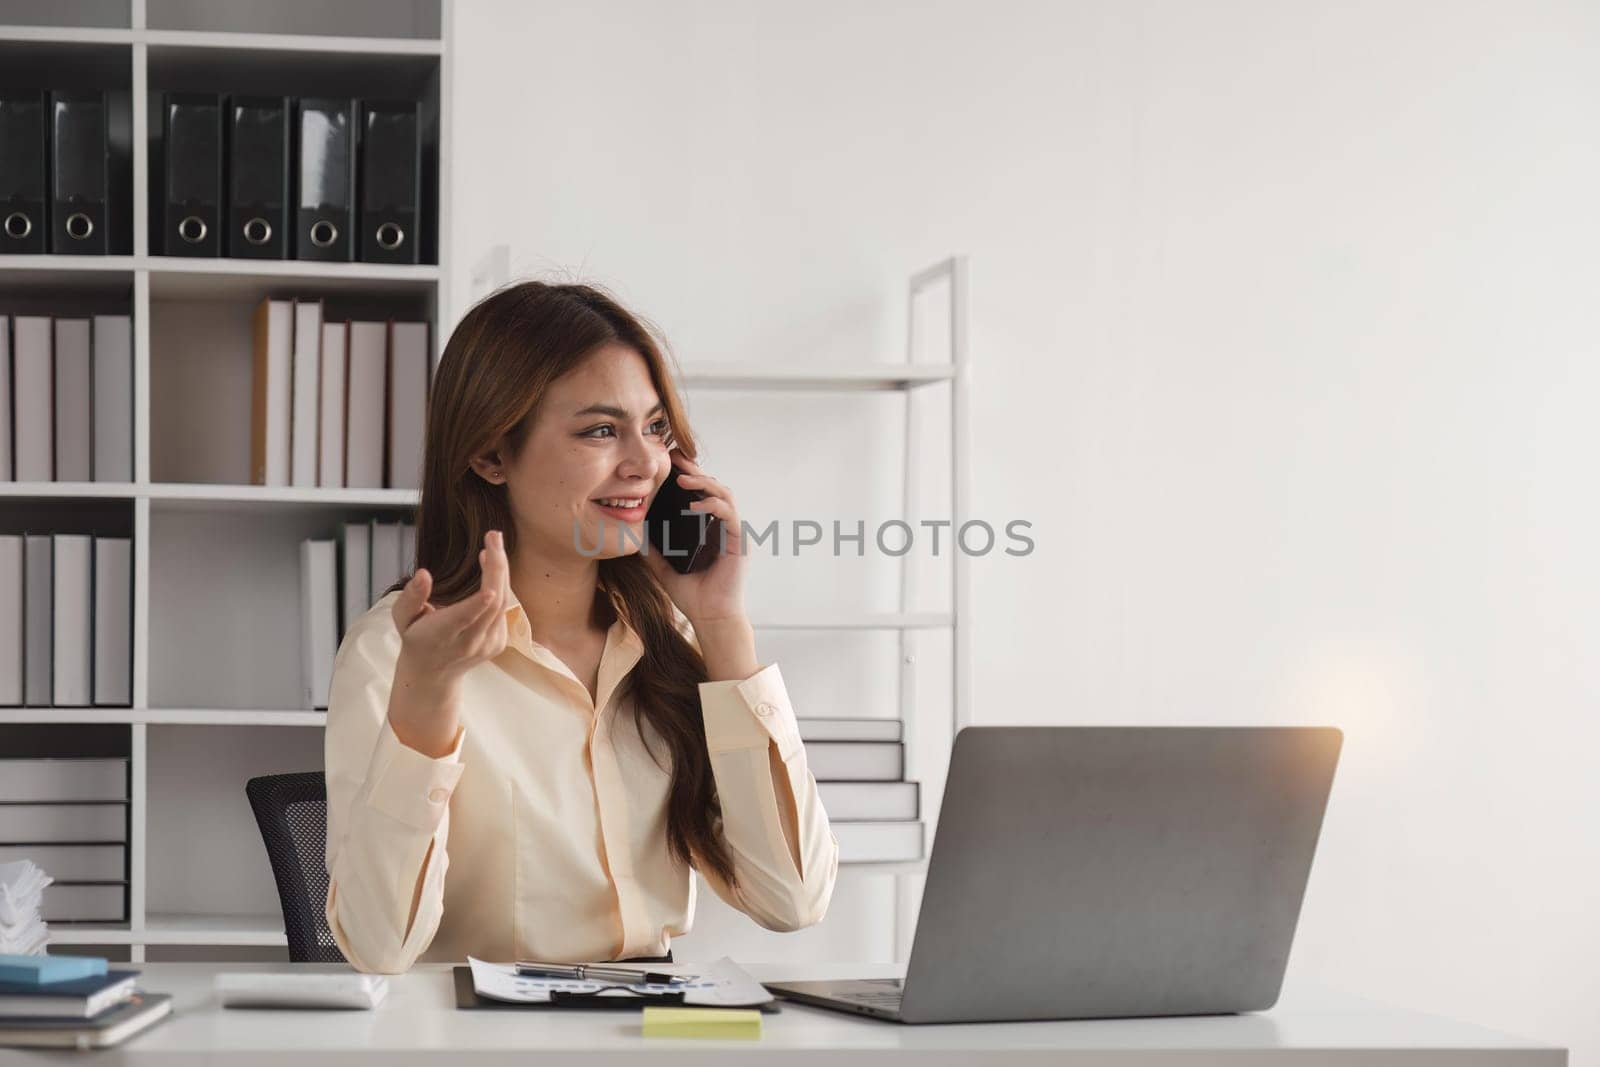 Business woman talking on a phone call in office. Happy female professional calling her associates on a mobile phone by nateemee